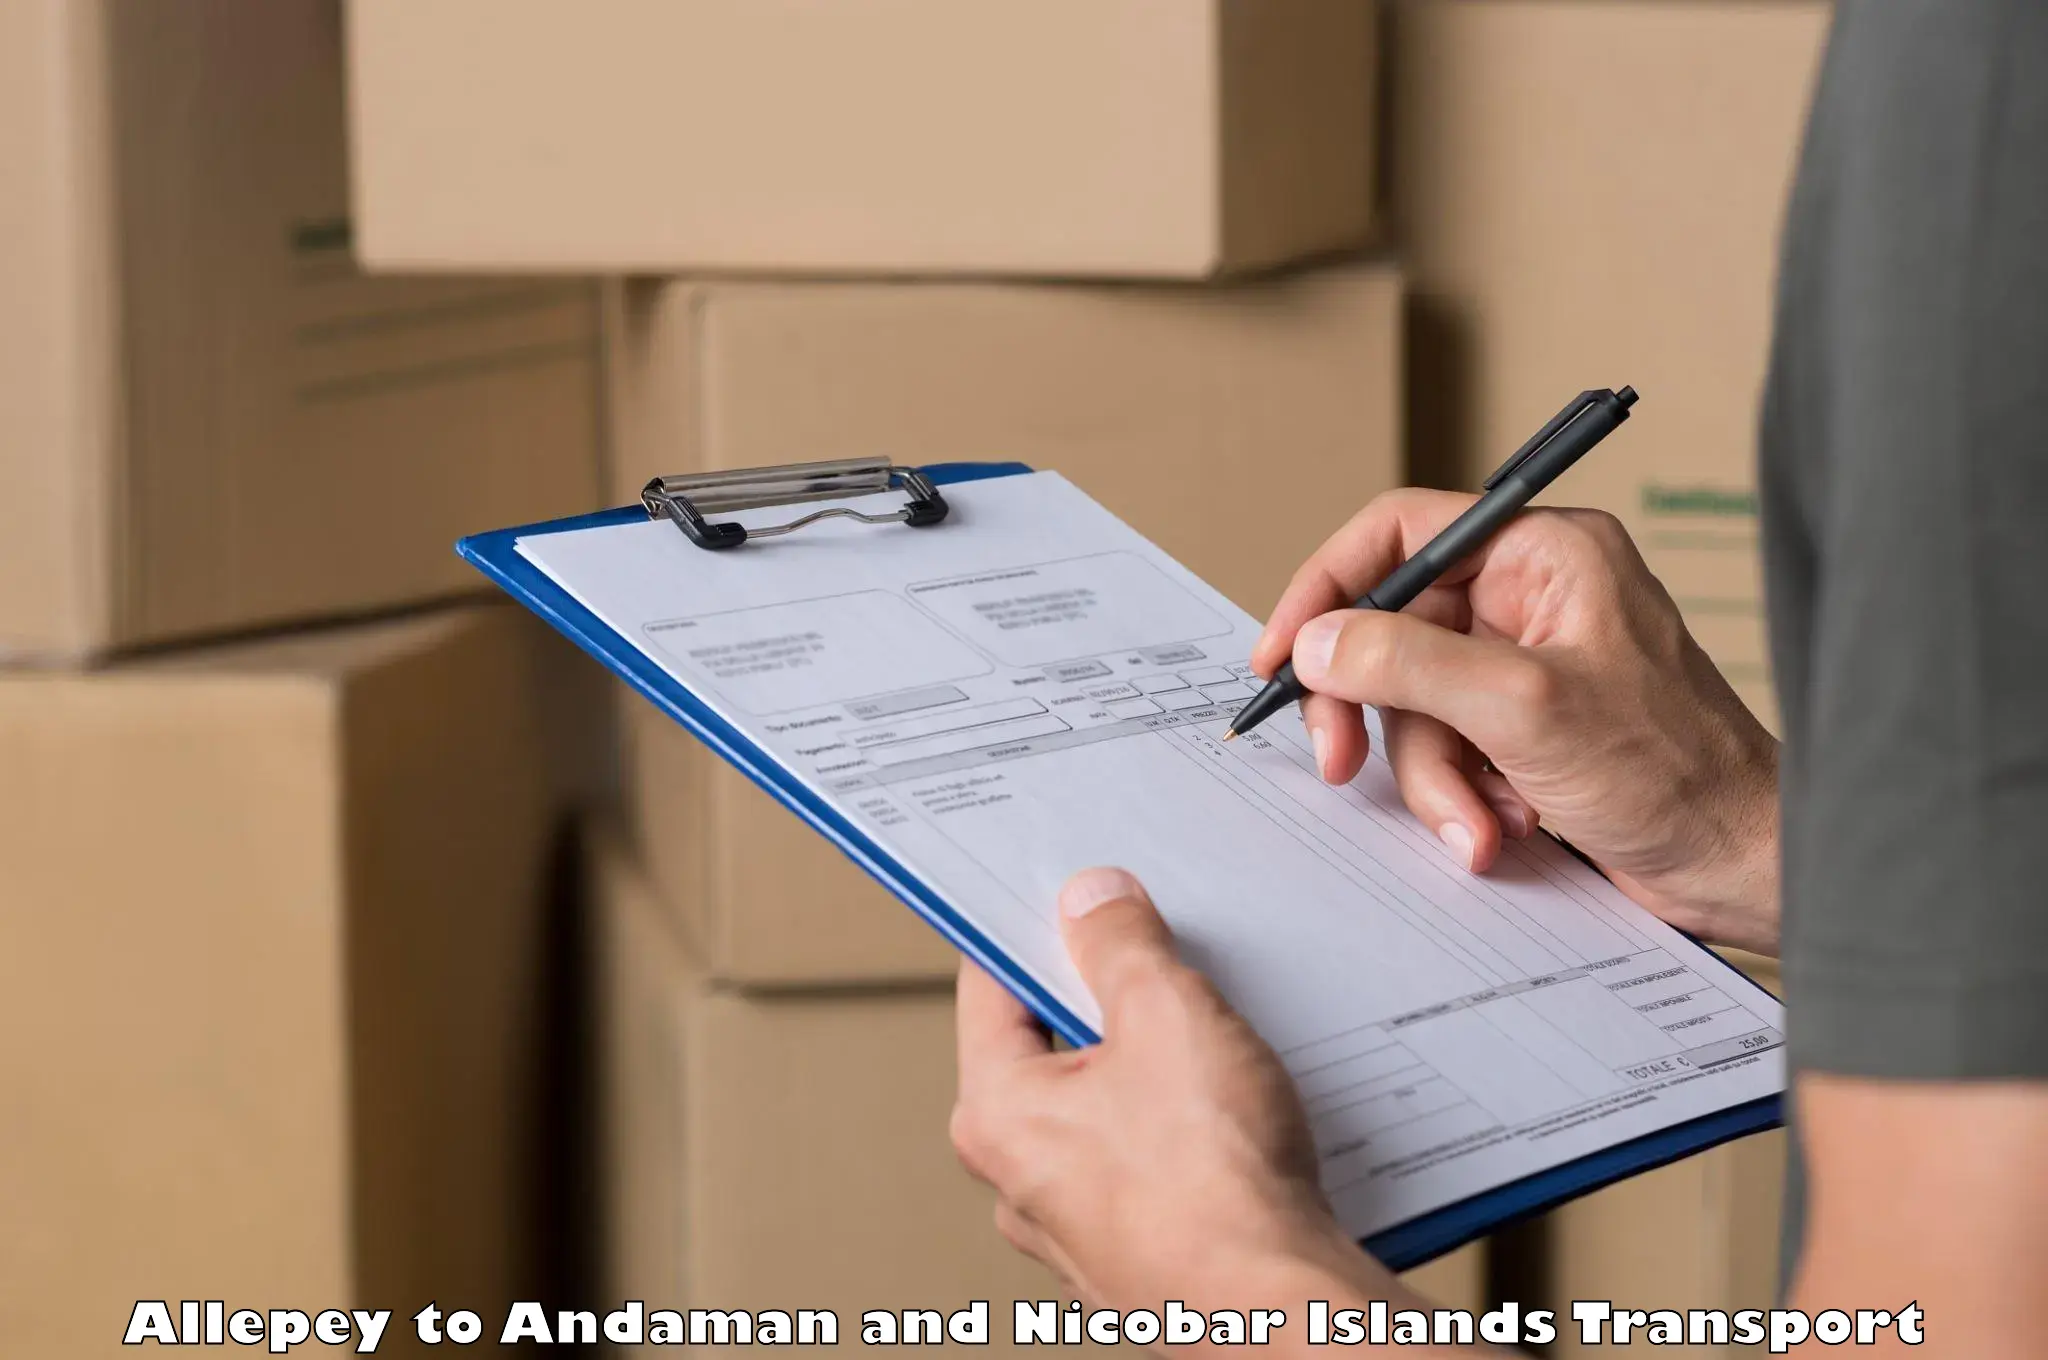 Lorry transport service Allepey to Andaman and Nicobar Islands